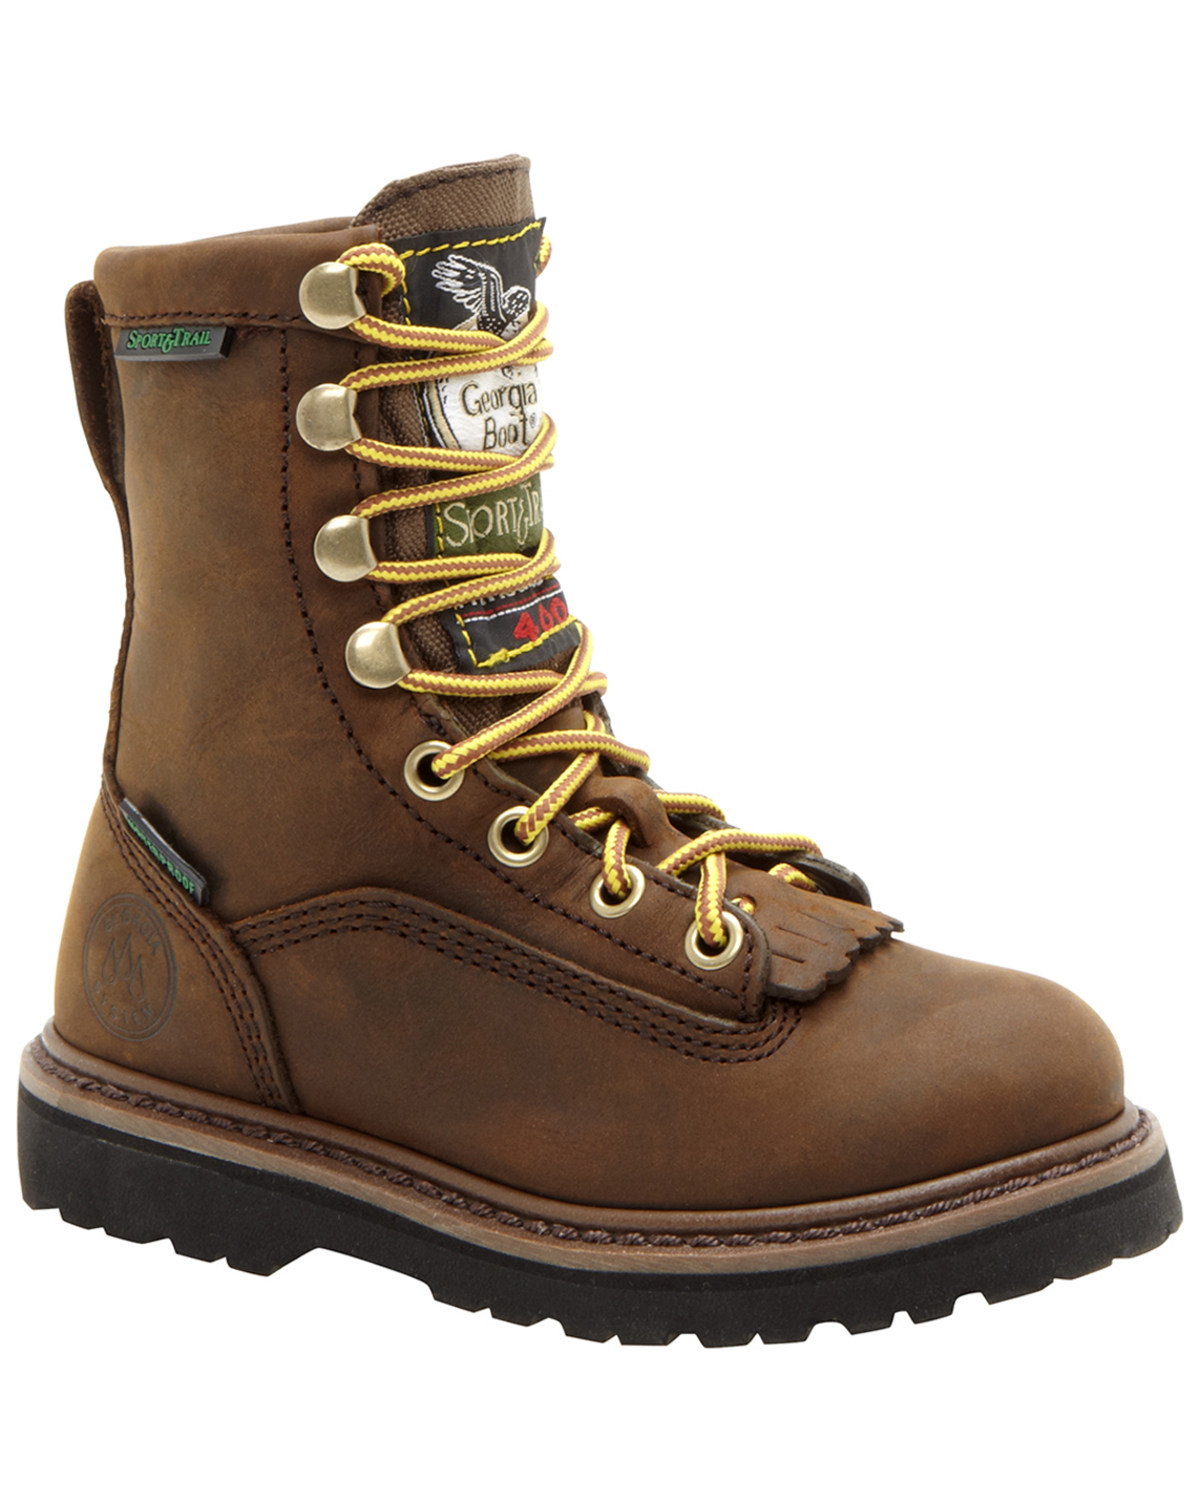 Georgia Boys' Insulated Outdoor Waterproof Lace-Up Boots